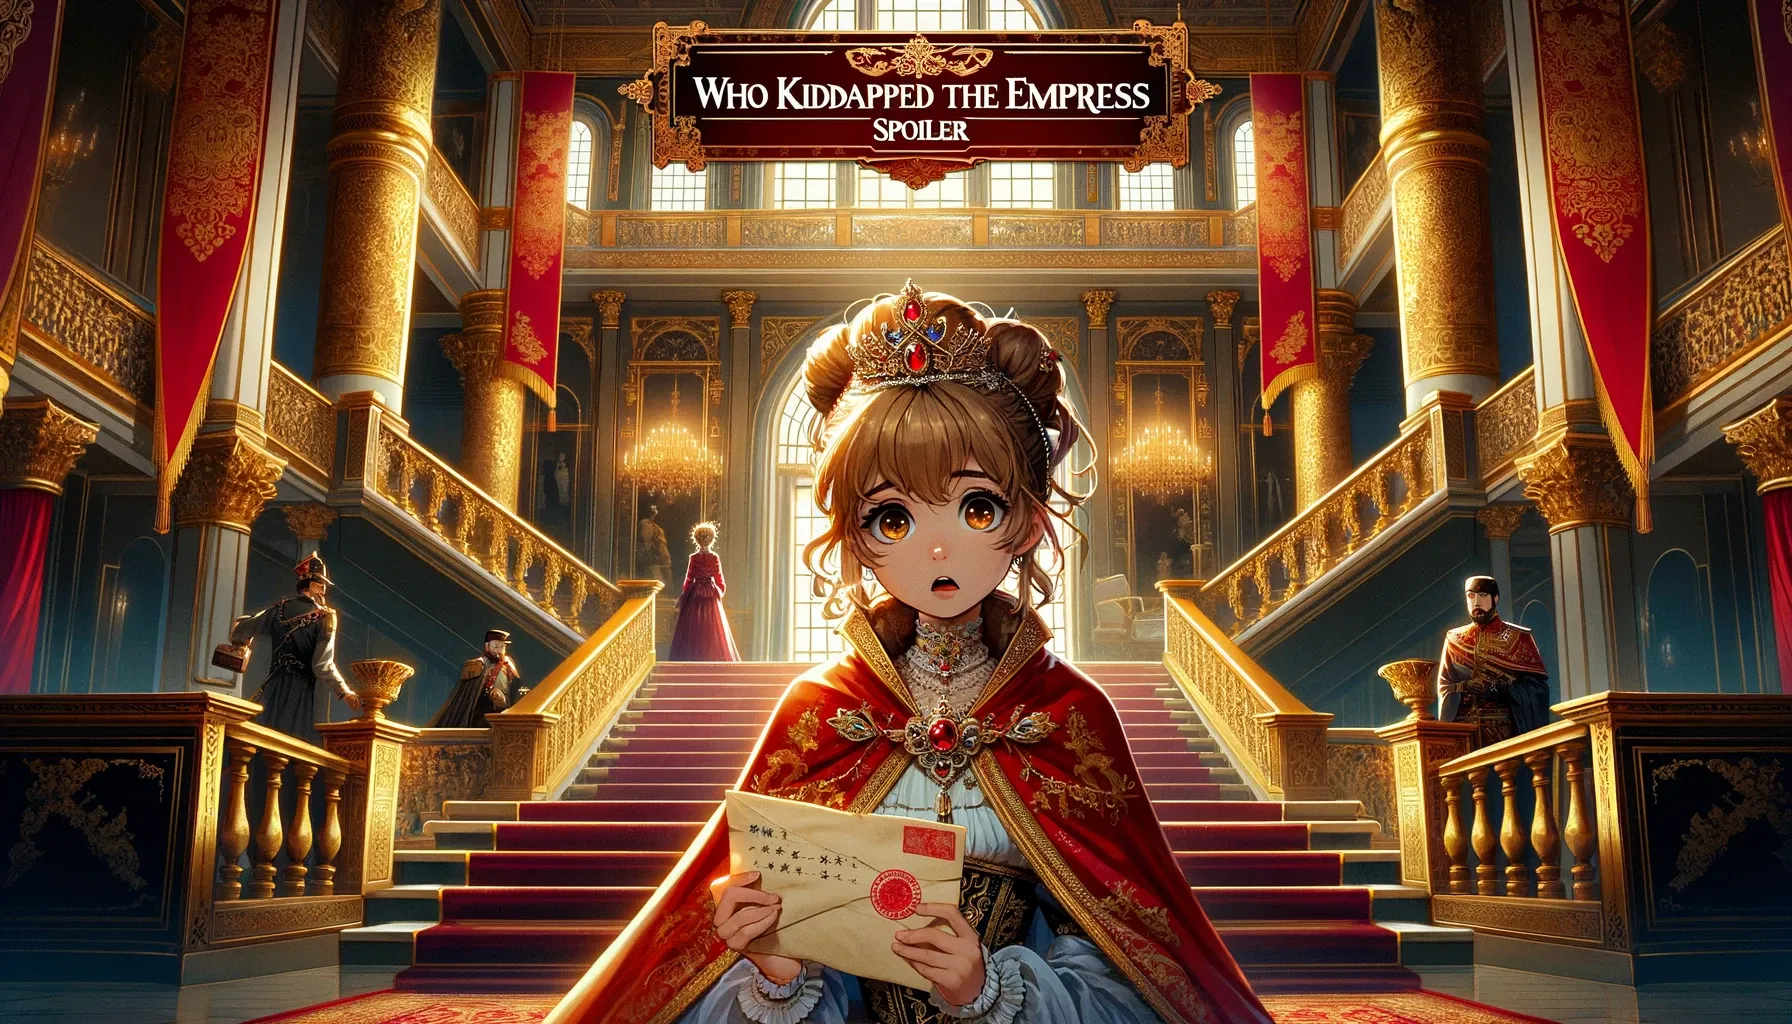 Who Kidnapped the Empress Spoiler Novel: Complete Story Overview